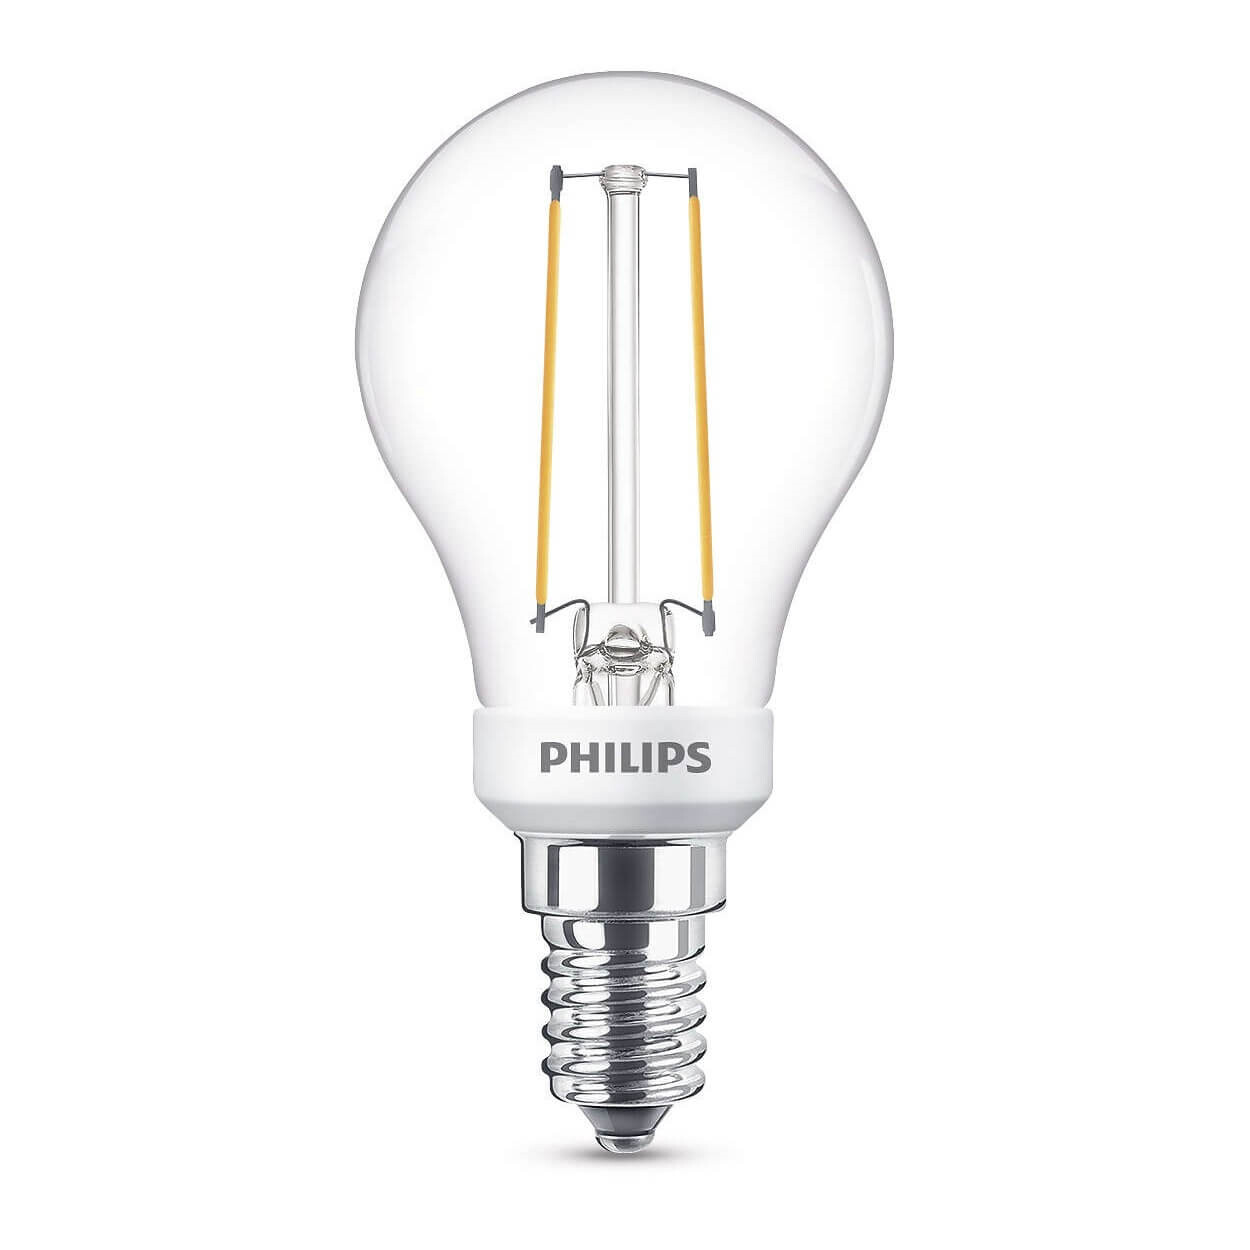 Bulb LED 3W Glass Crown (250lm) - Philips - online